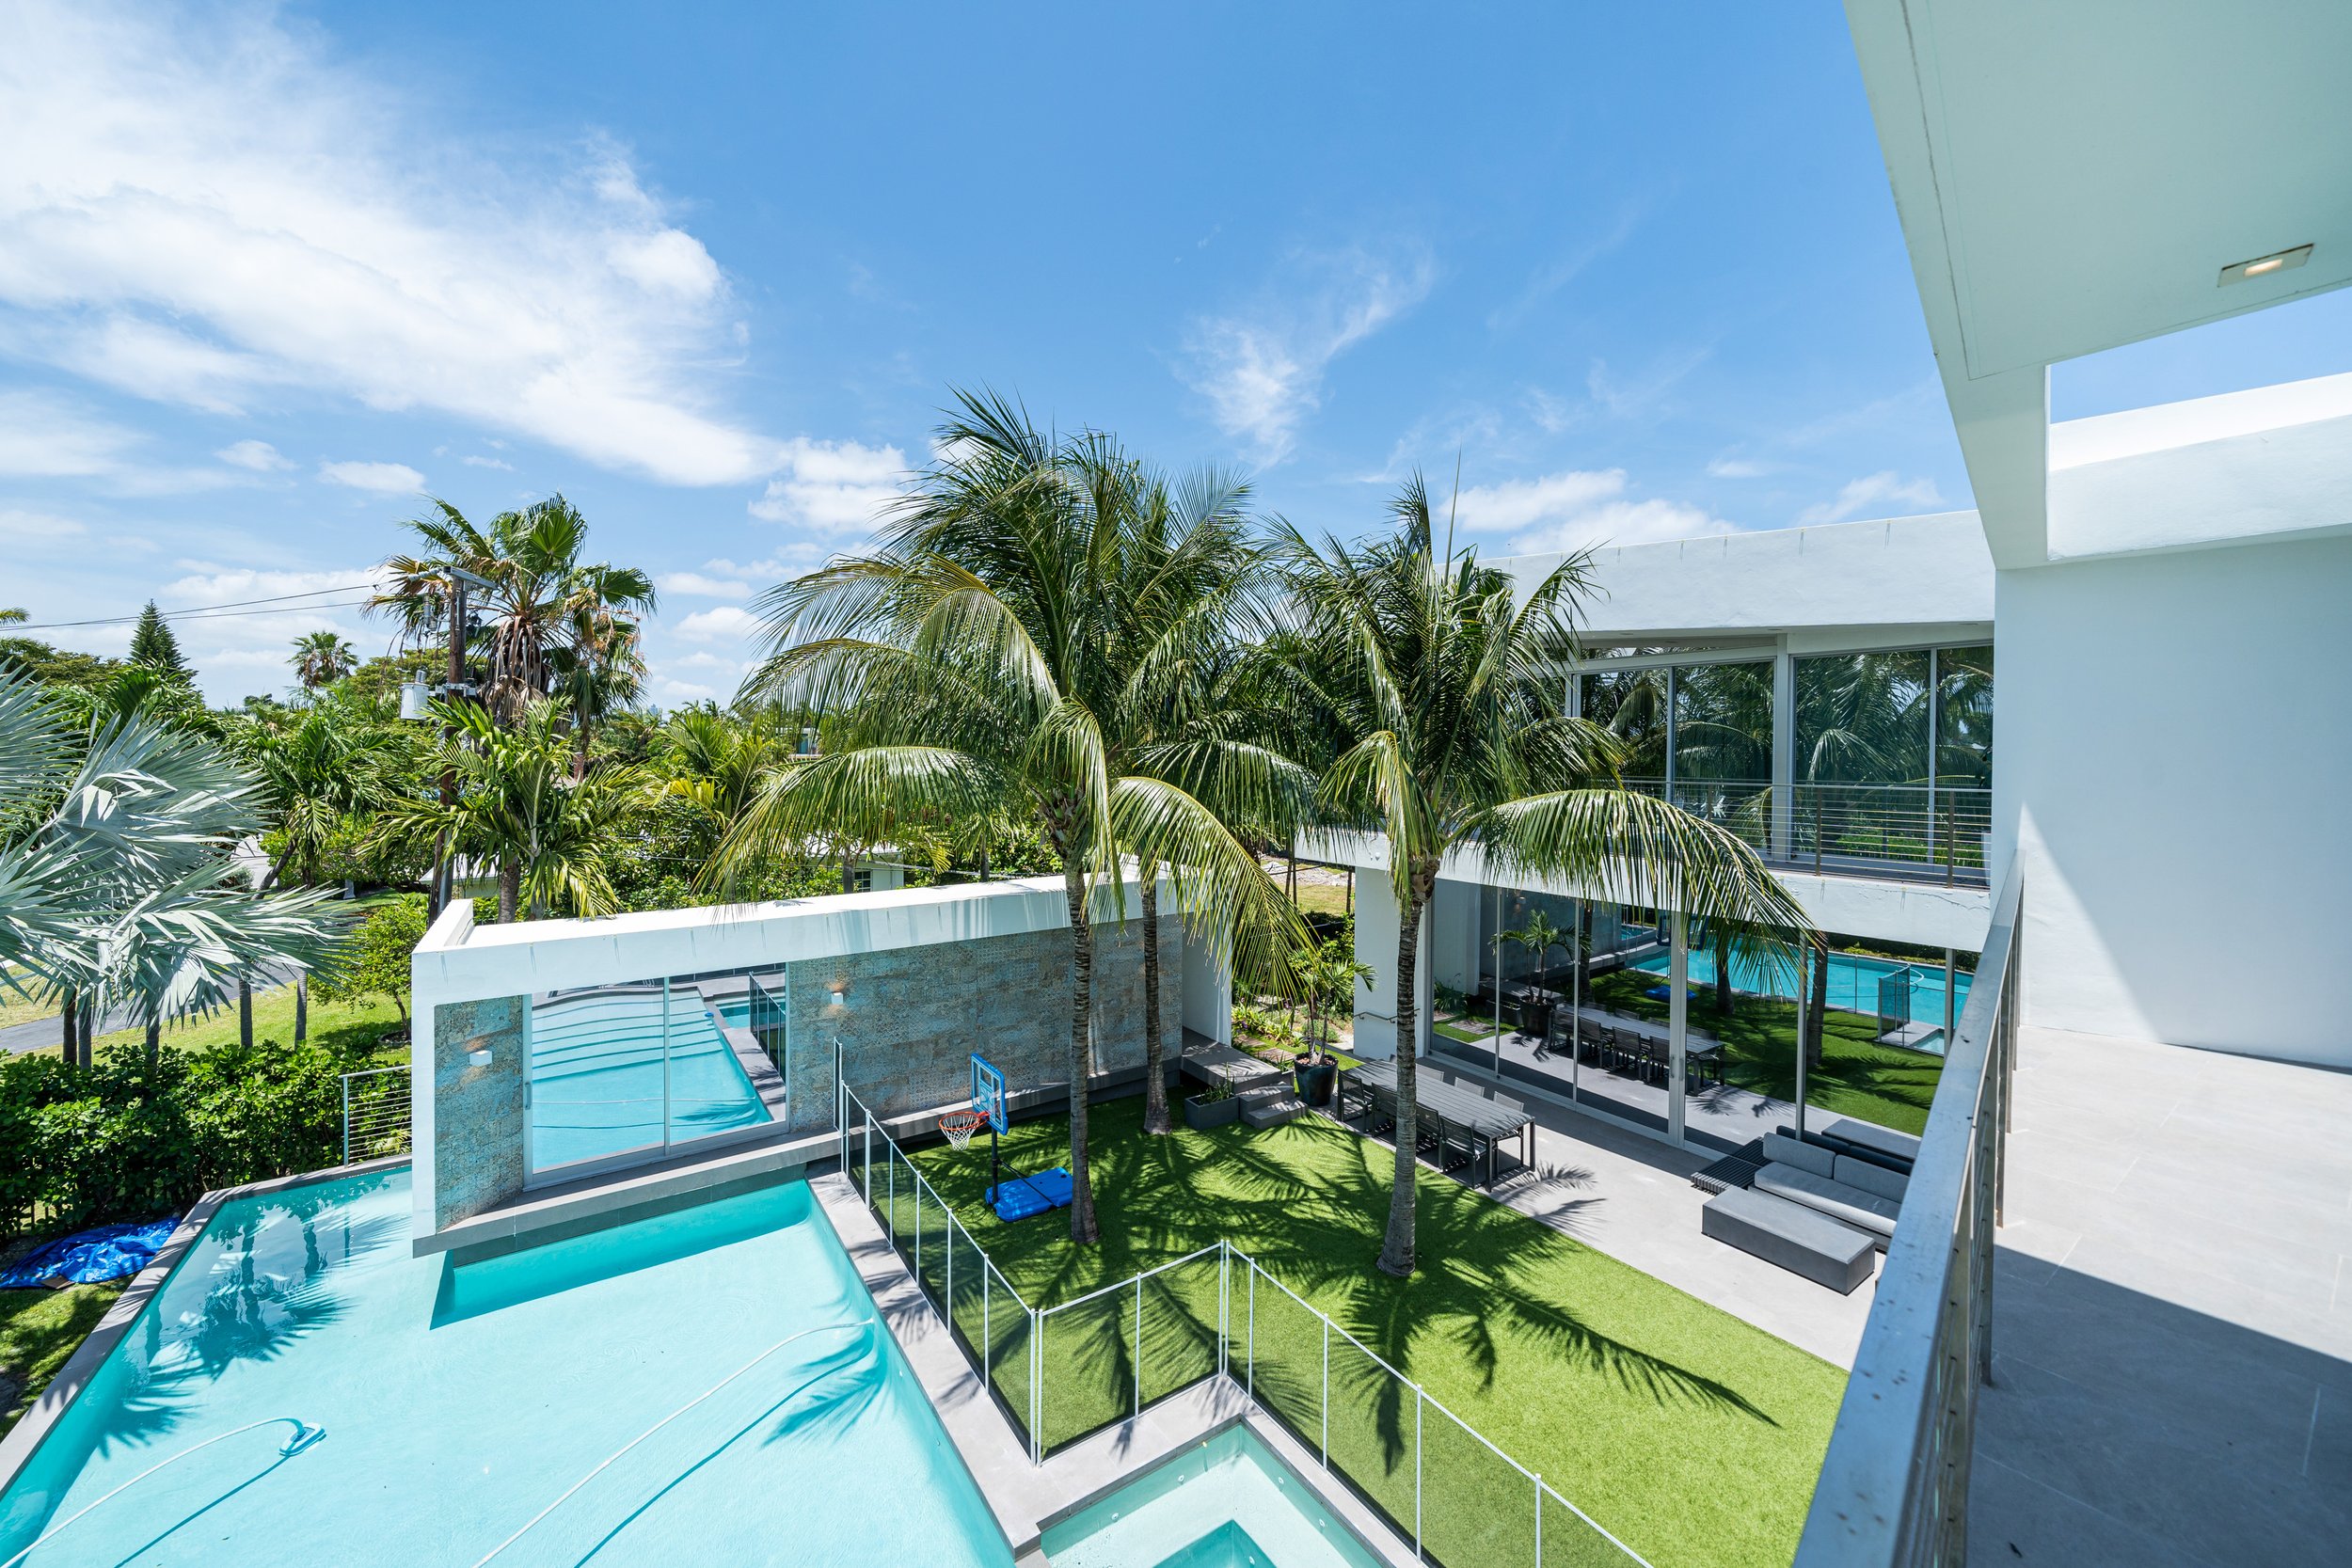 Miami Heat Star Victor Oladipo Lists Hibiscus Island Contemporary For $10 Million Amidst NBA Finals 22.jpg